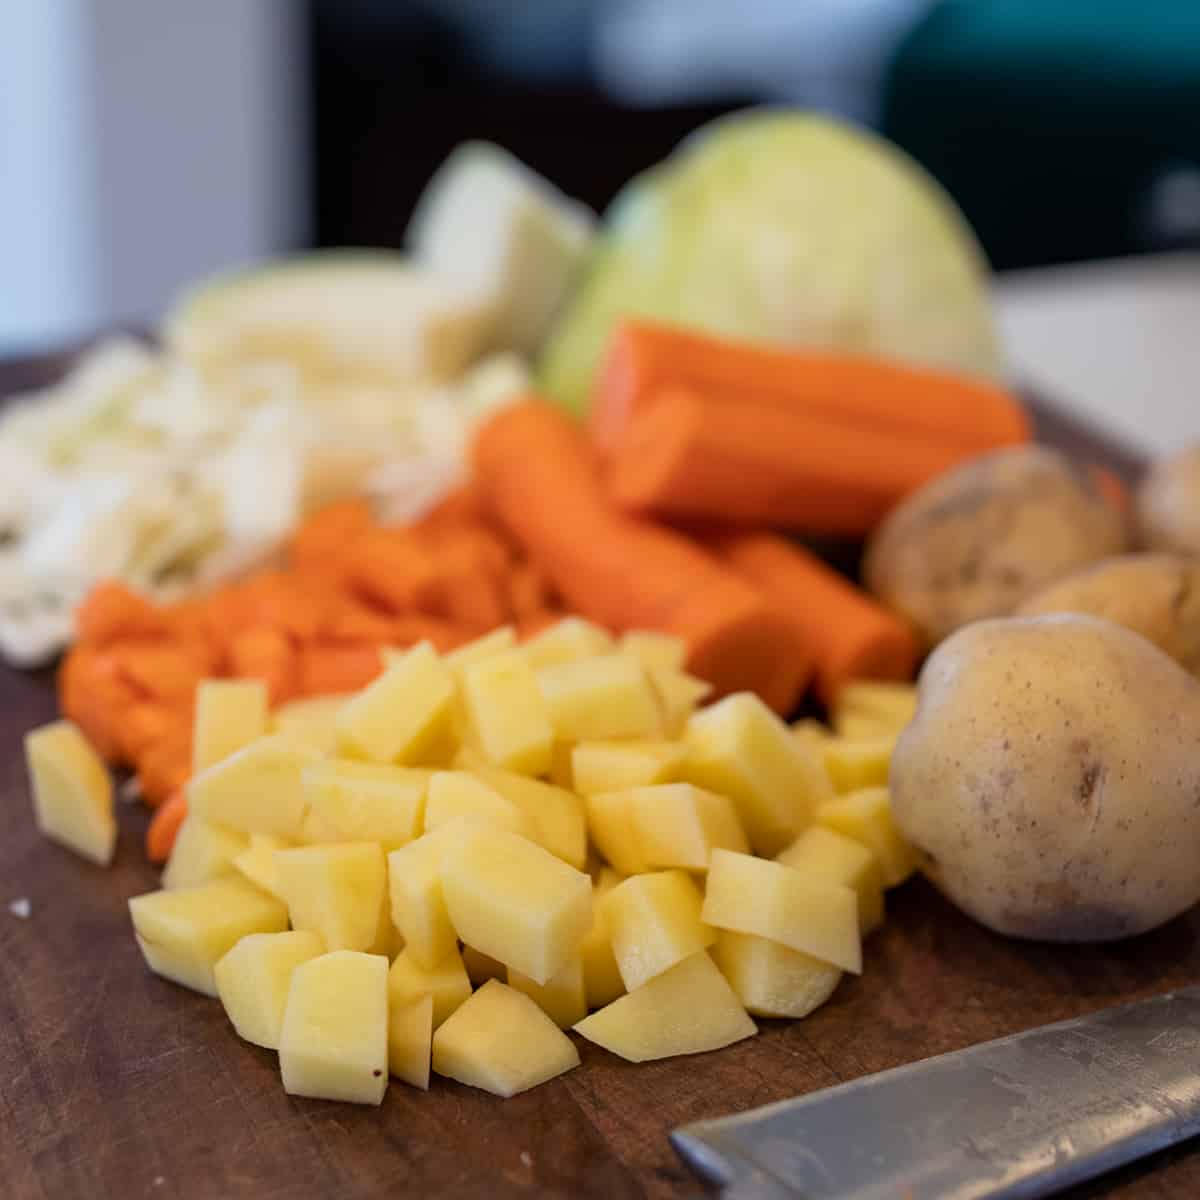 Potatoes, carrots and green cabbage cut into chunks.